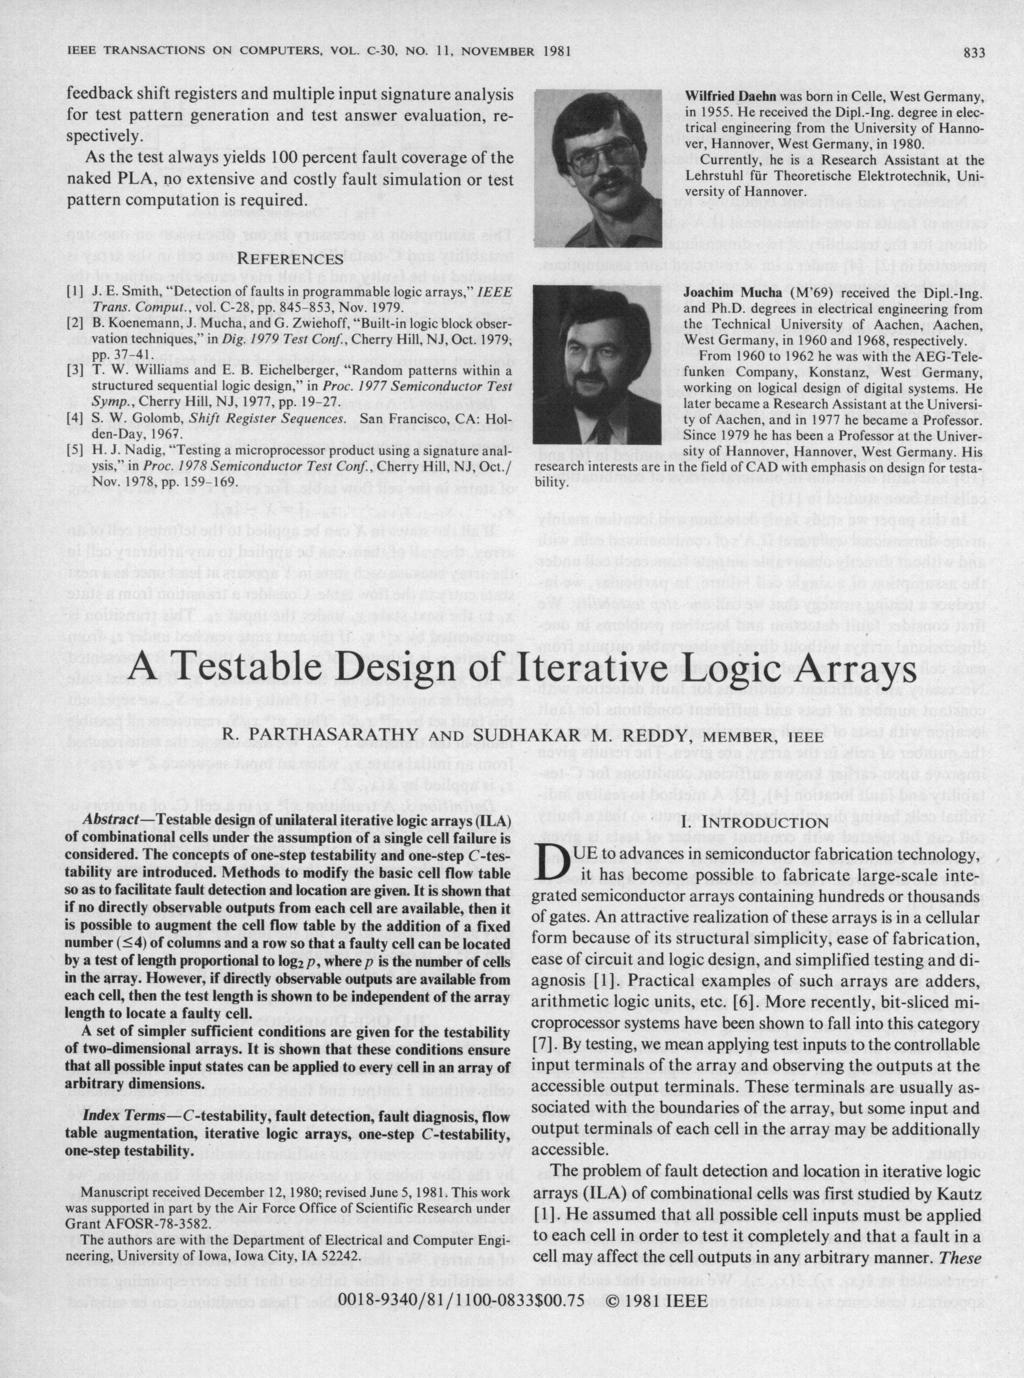 EEE TRANSACTONS ON COMPUTERS, VOL. C-30, NO. i, NOVEMBER 1981 feedback shift registers and multiple input signature analysis for test pattern generation and test answer evaluation, respectively.